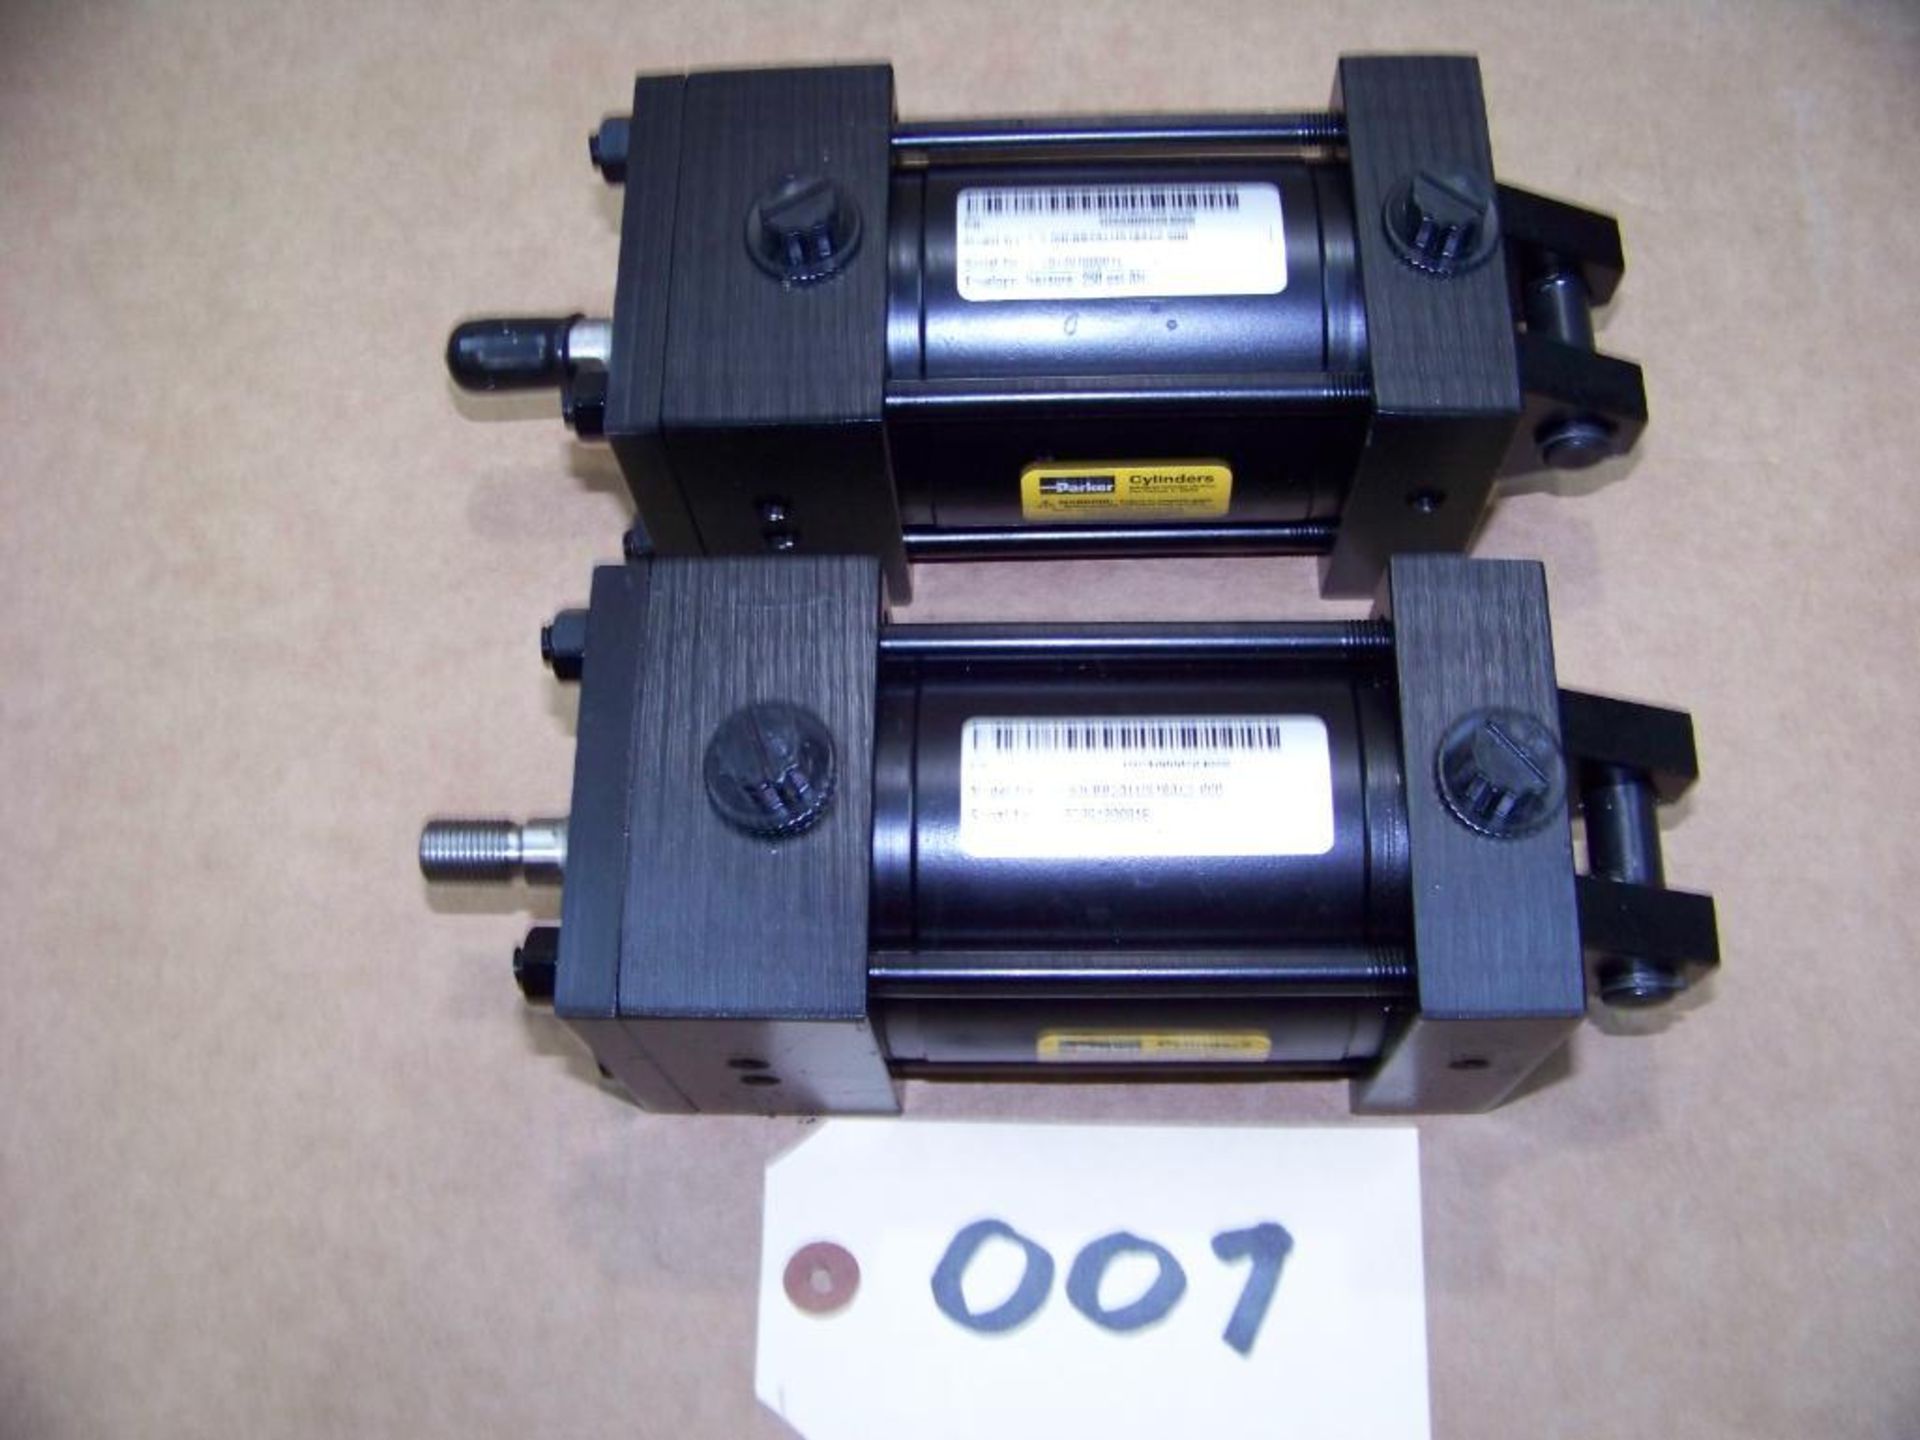 2 - PARKER HEAVY DUTY PNEUMATIC CYLINDERS, CUSHIONED AT BOTH ENDS, "NEW"